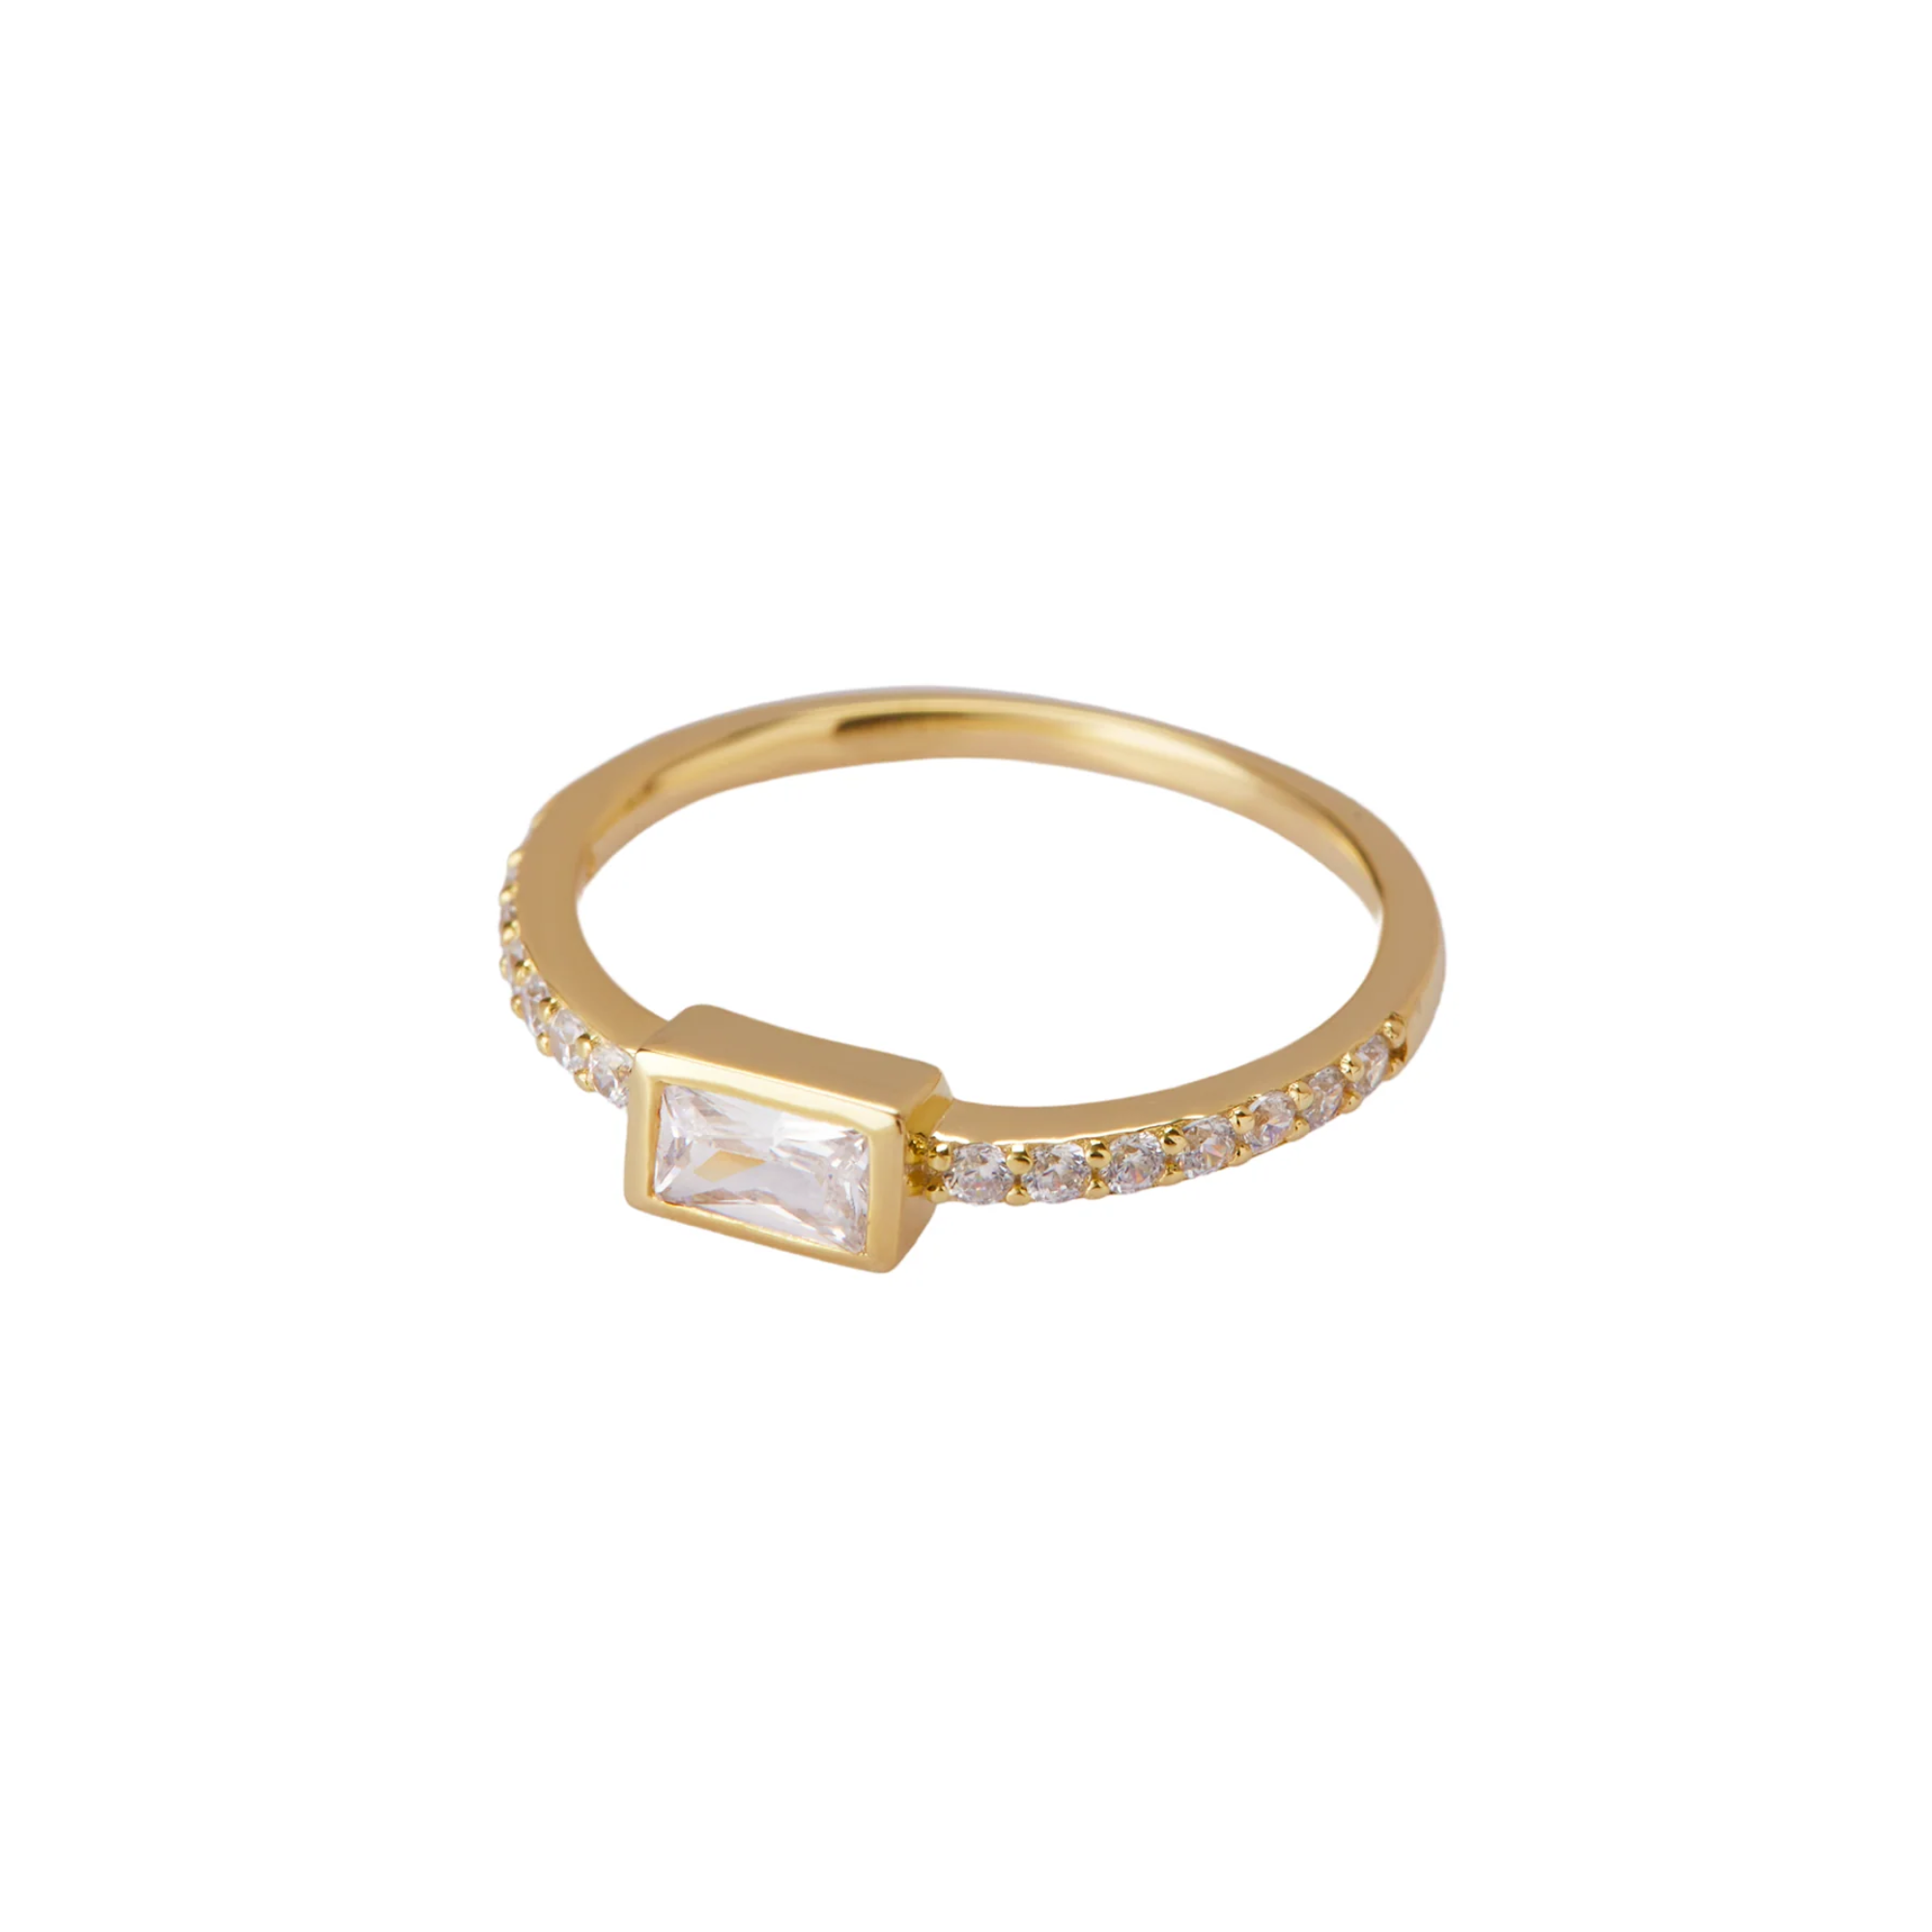 THE PAVE BAGUETTE RING